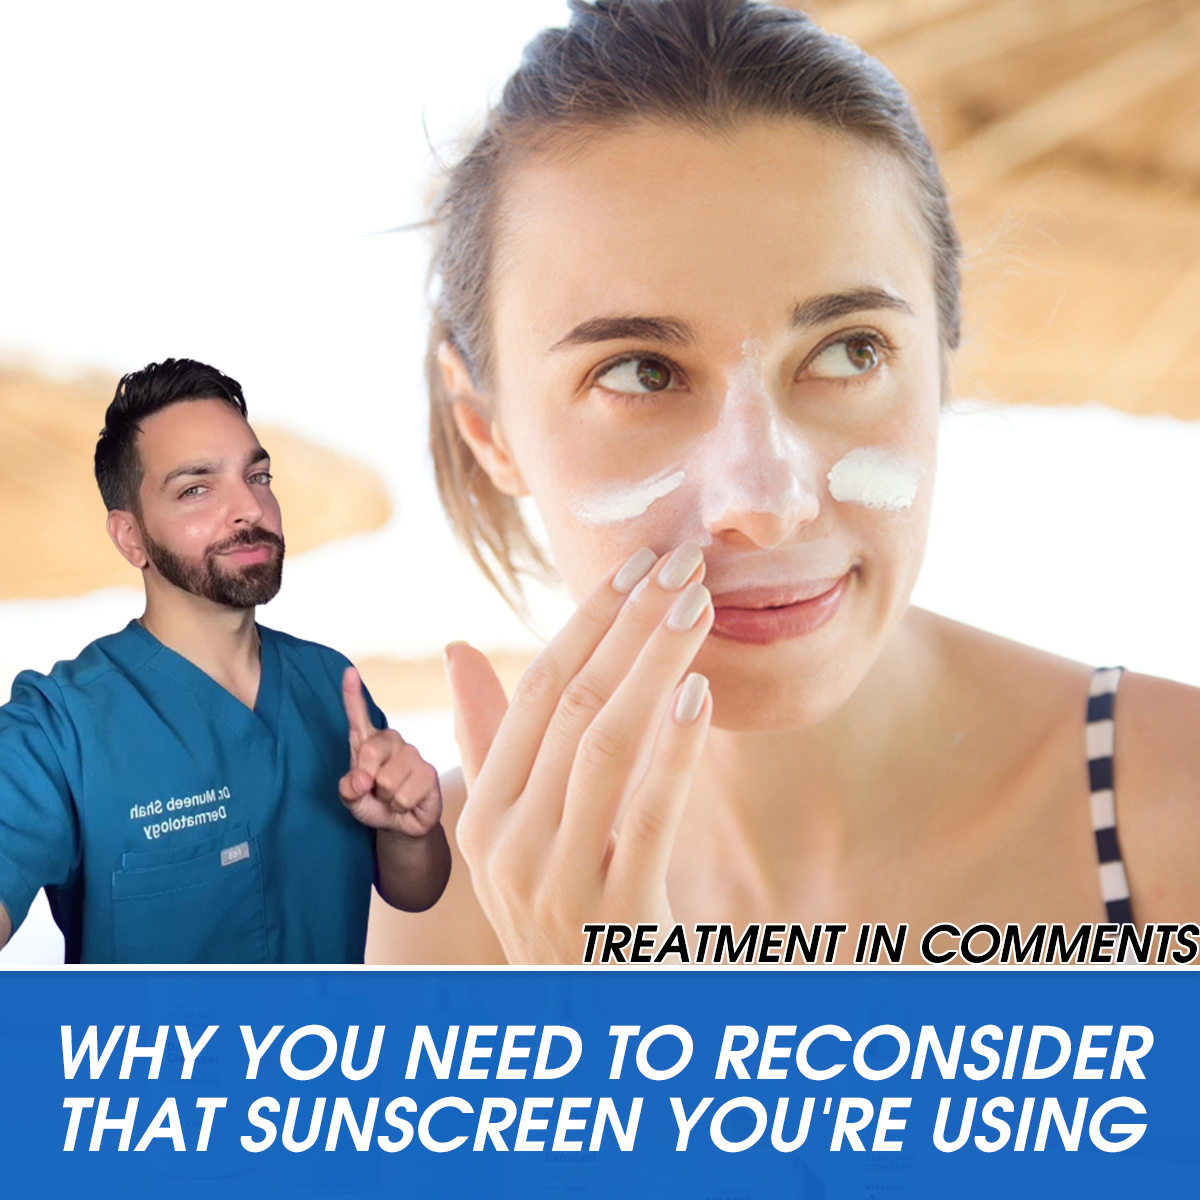 Why You Need to Reconsider That Sunscreen You’re Using